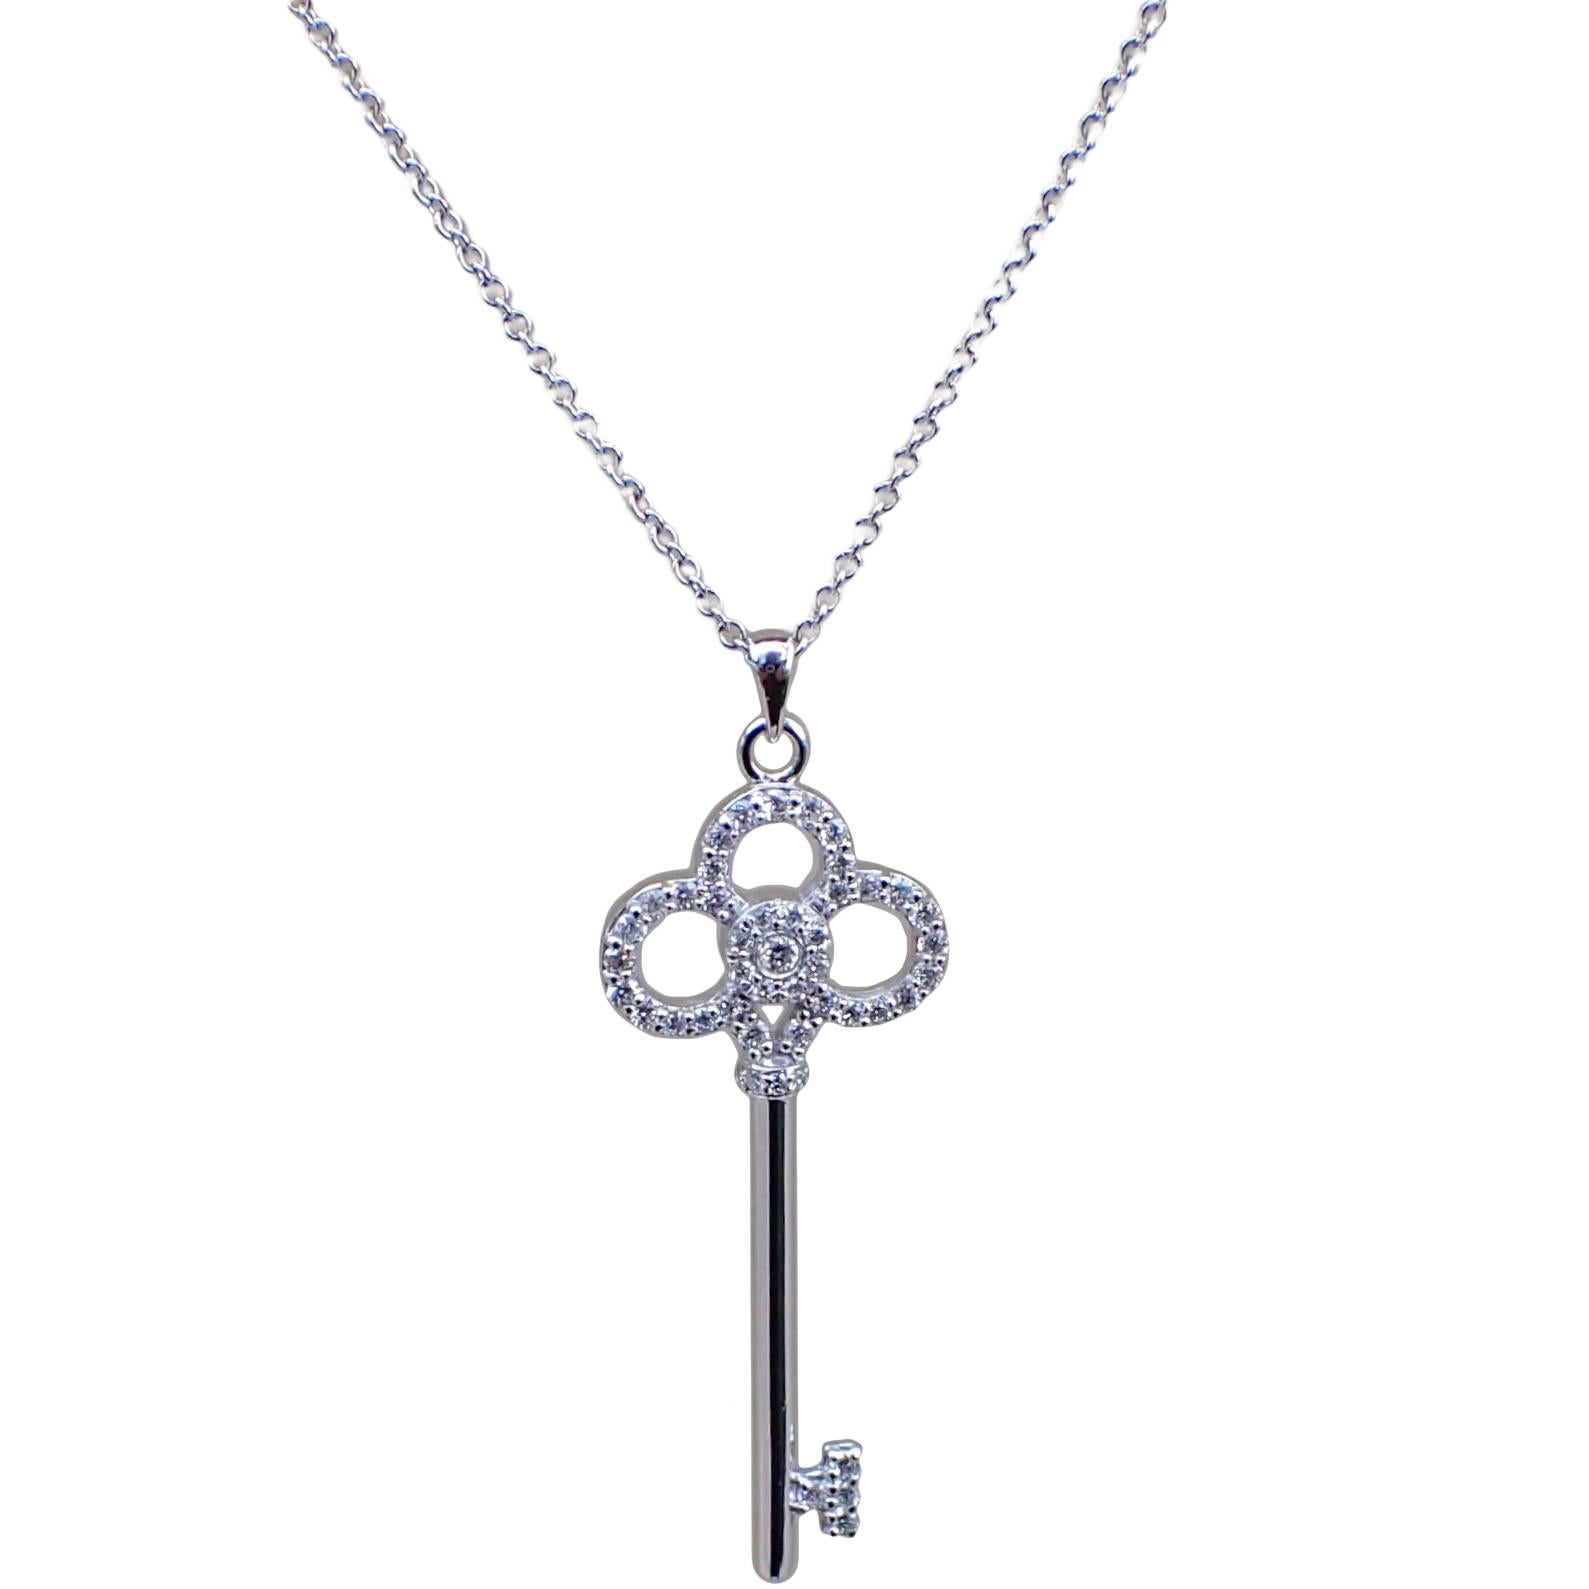 18 Karat White Gold Key Pendant with 0.43 Carat of Diamond on Cable Chain For Sale